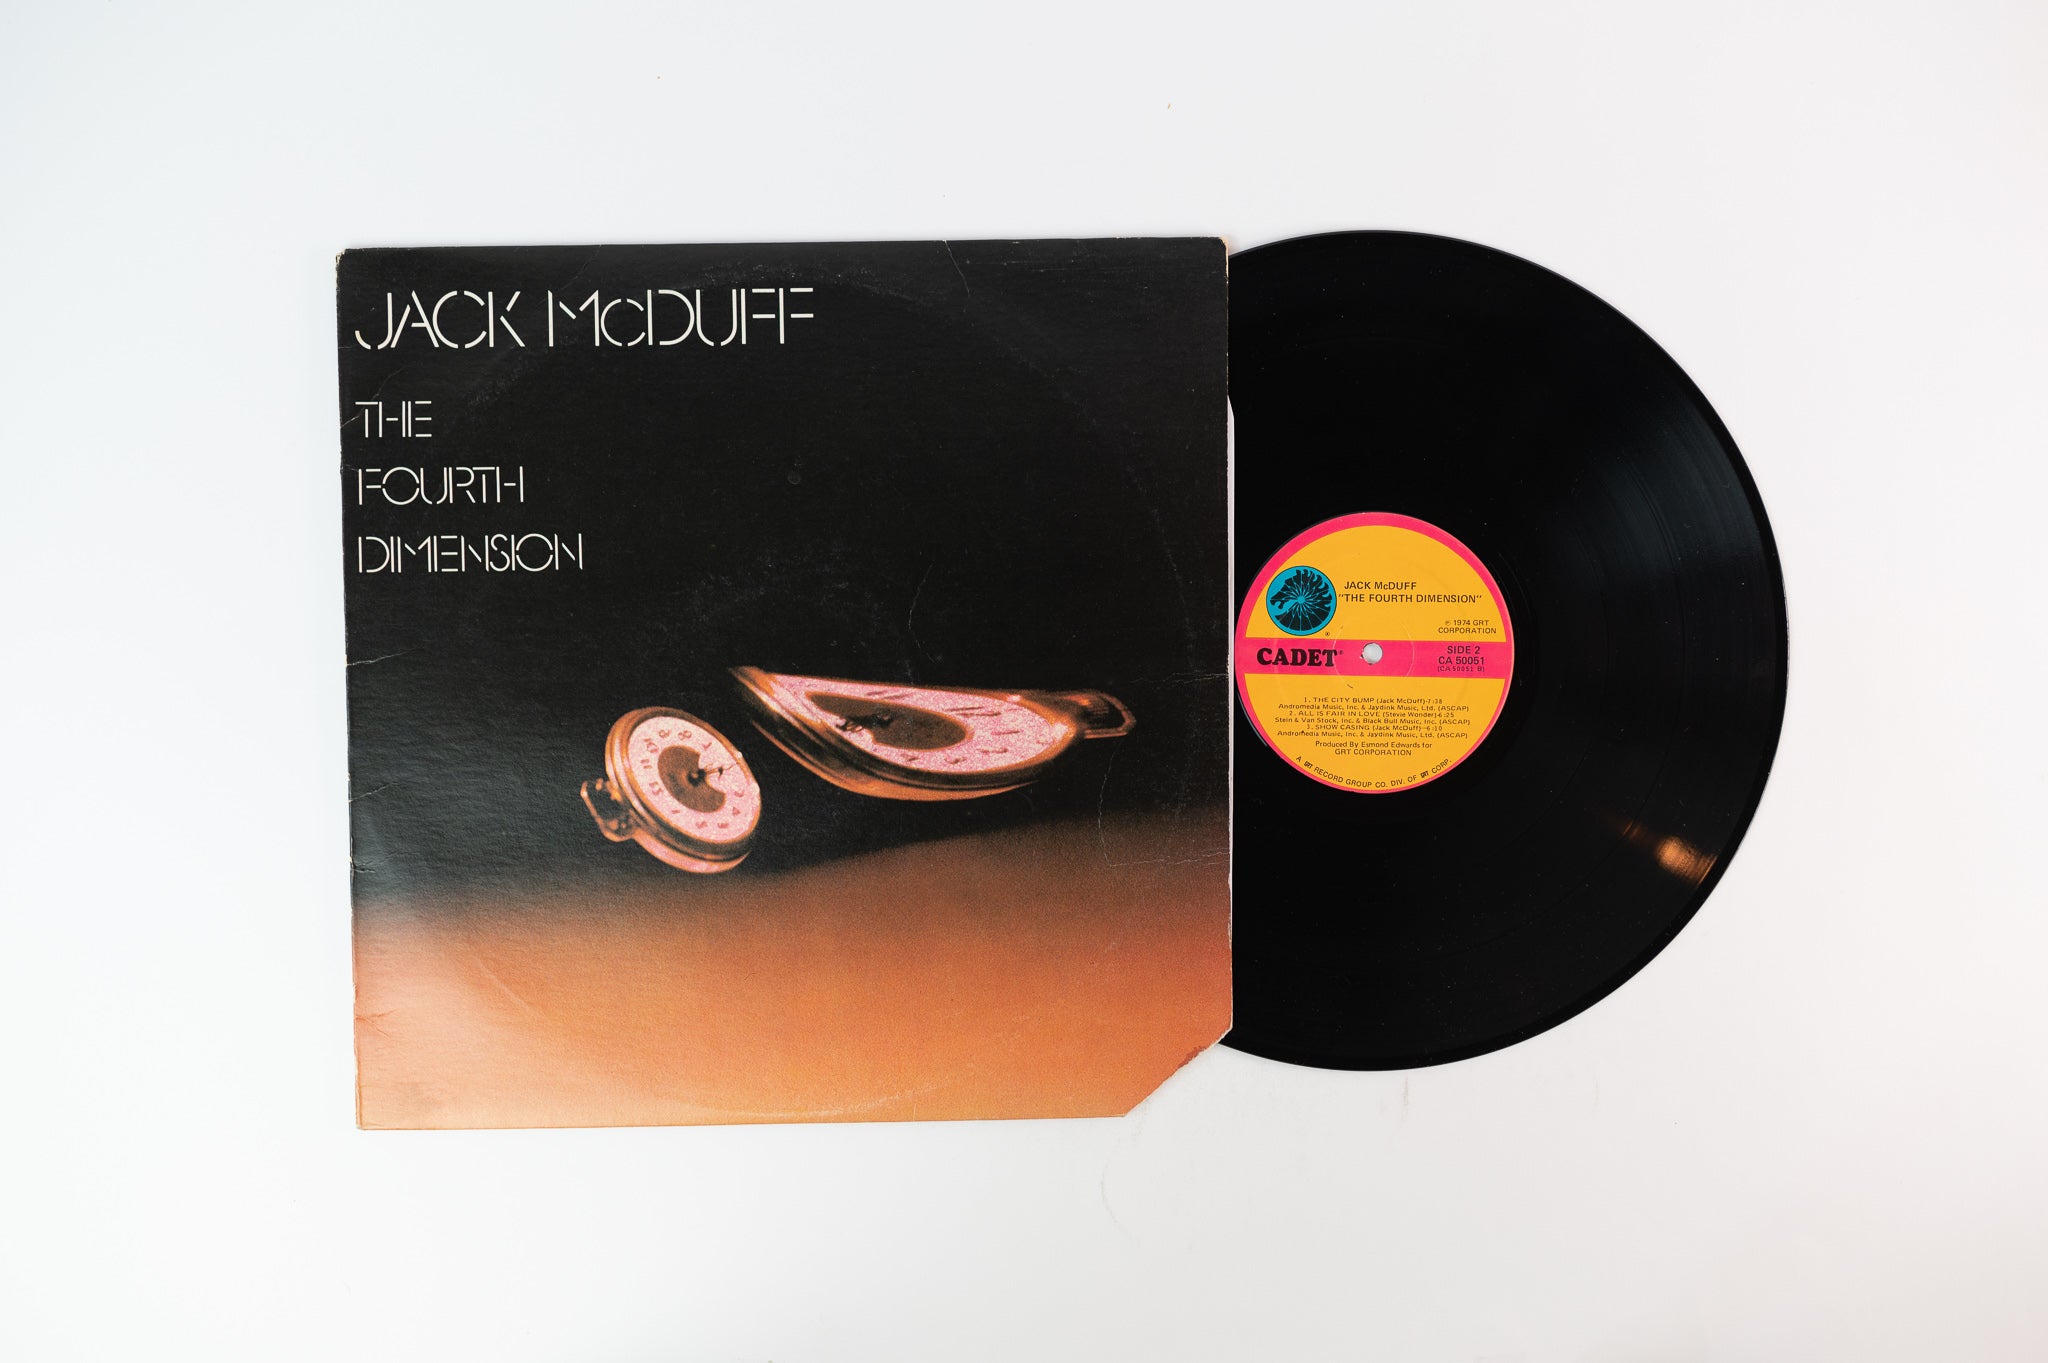 Brother Jack McDuff - The Fourth Dimension on Cadet